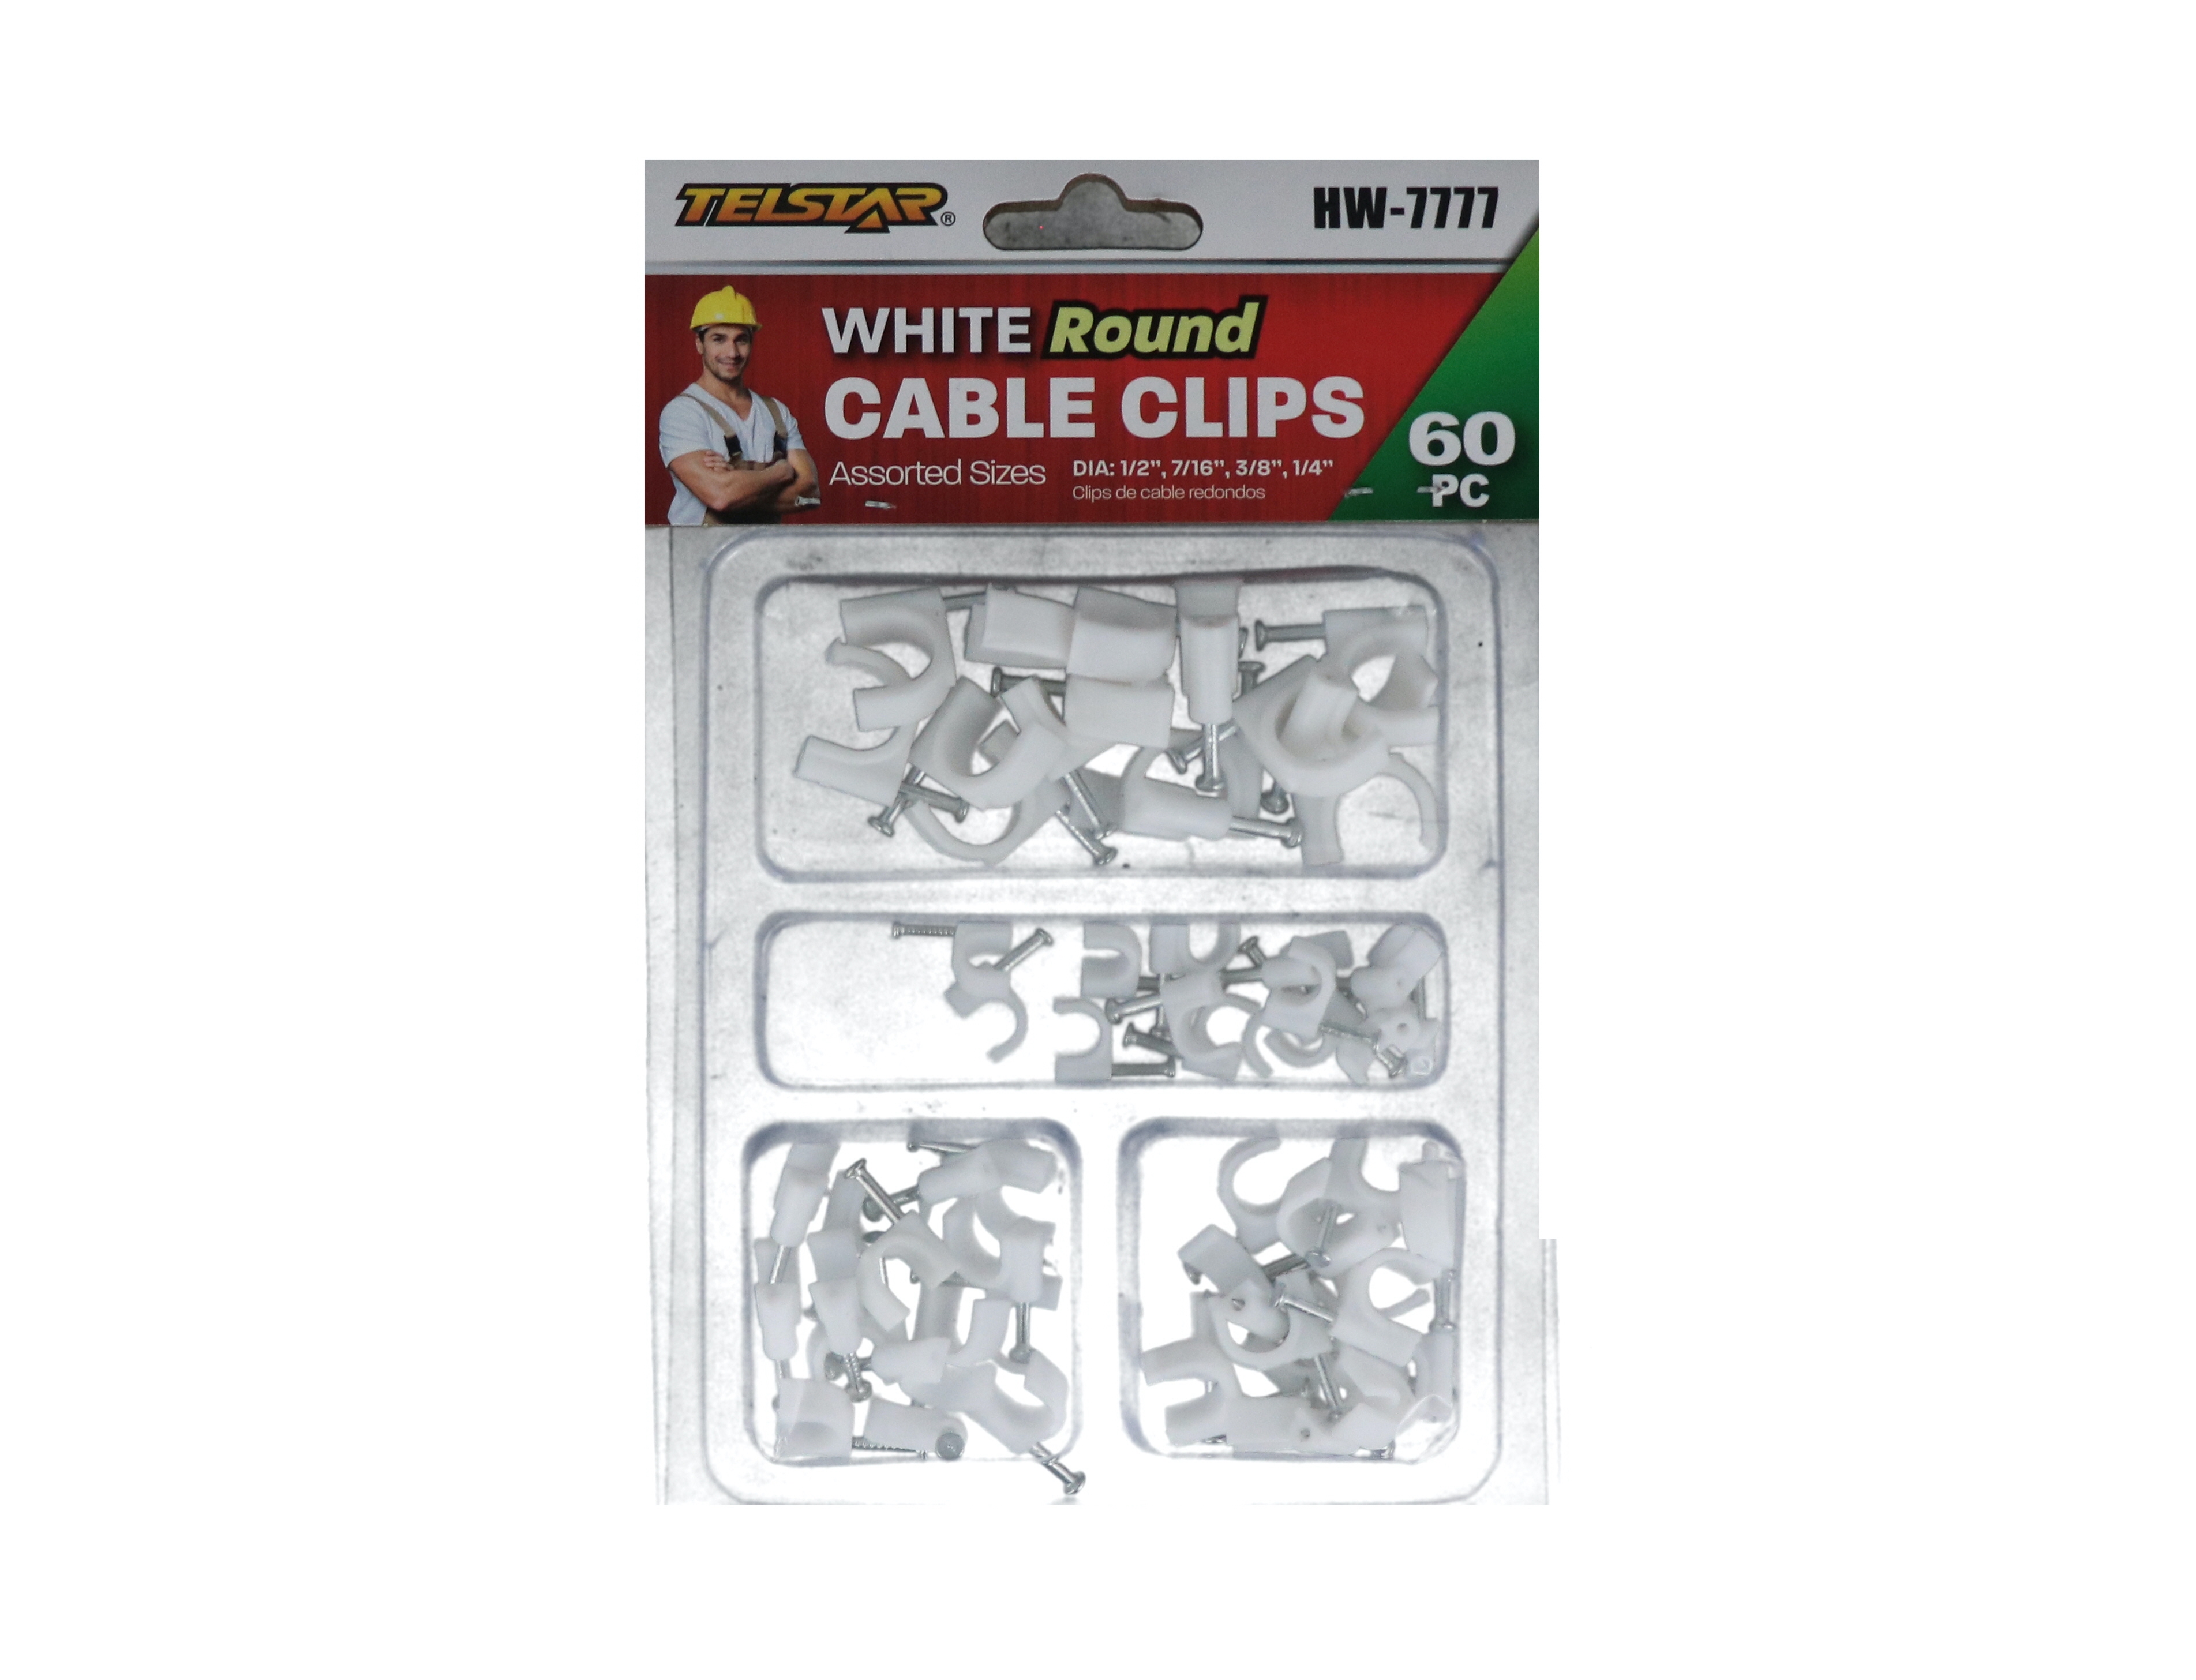 WHITE ROUND CABLE CLIPS